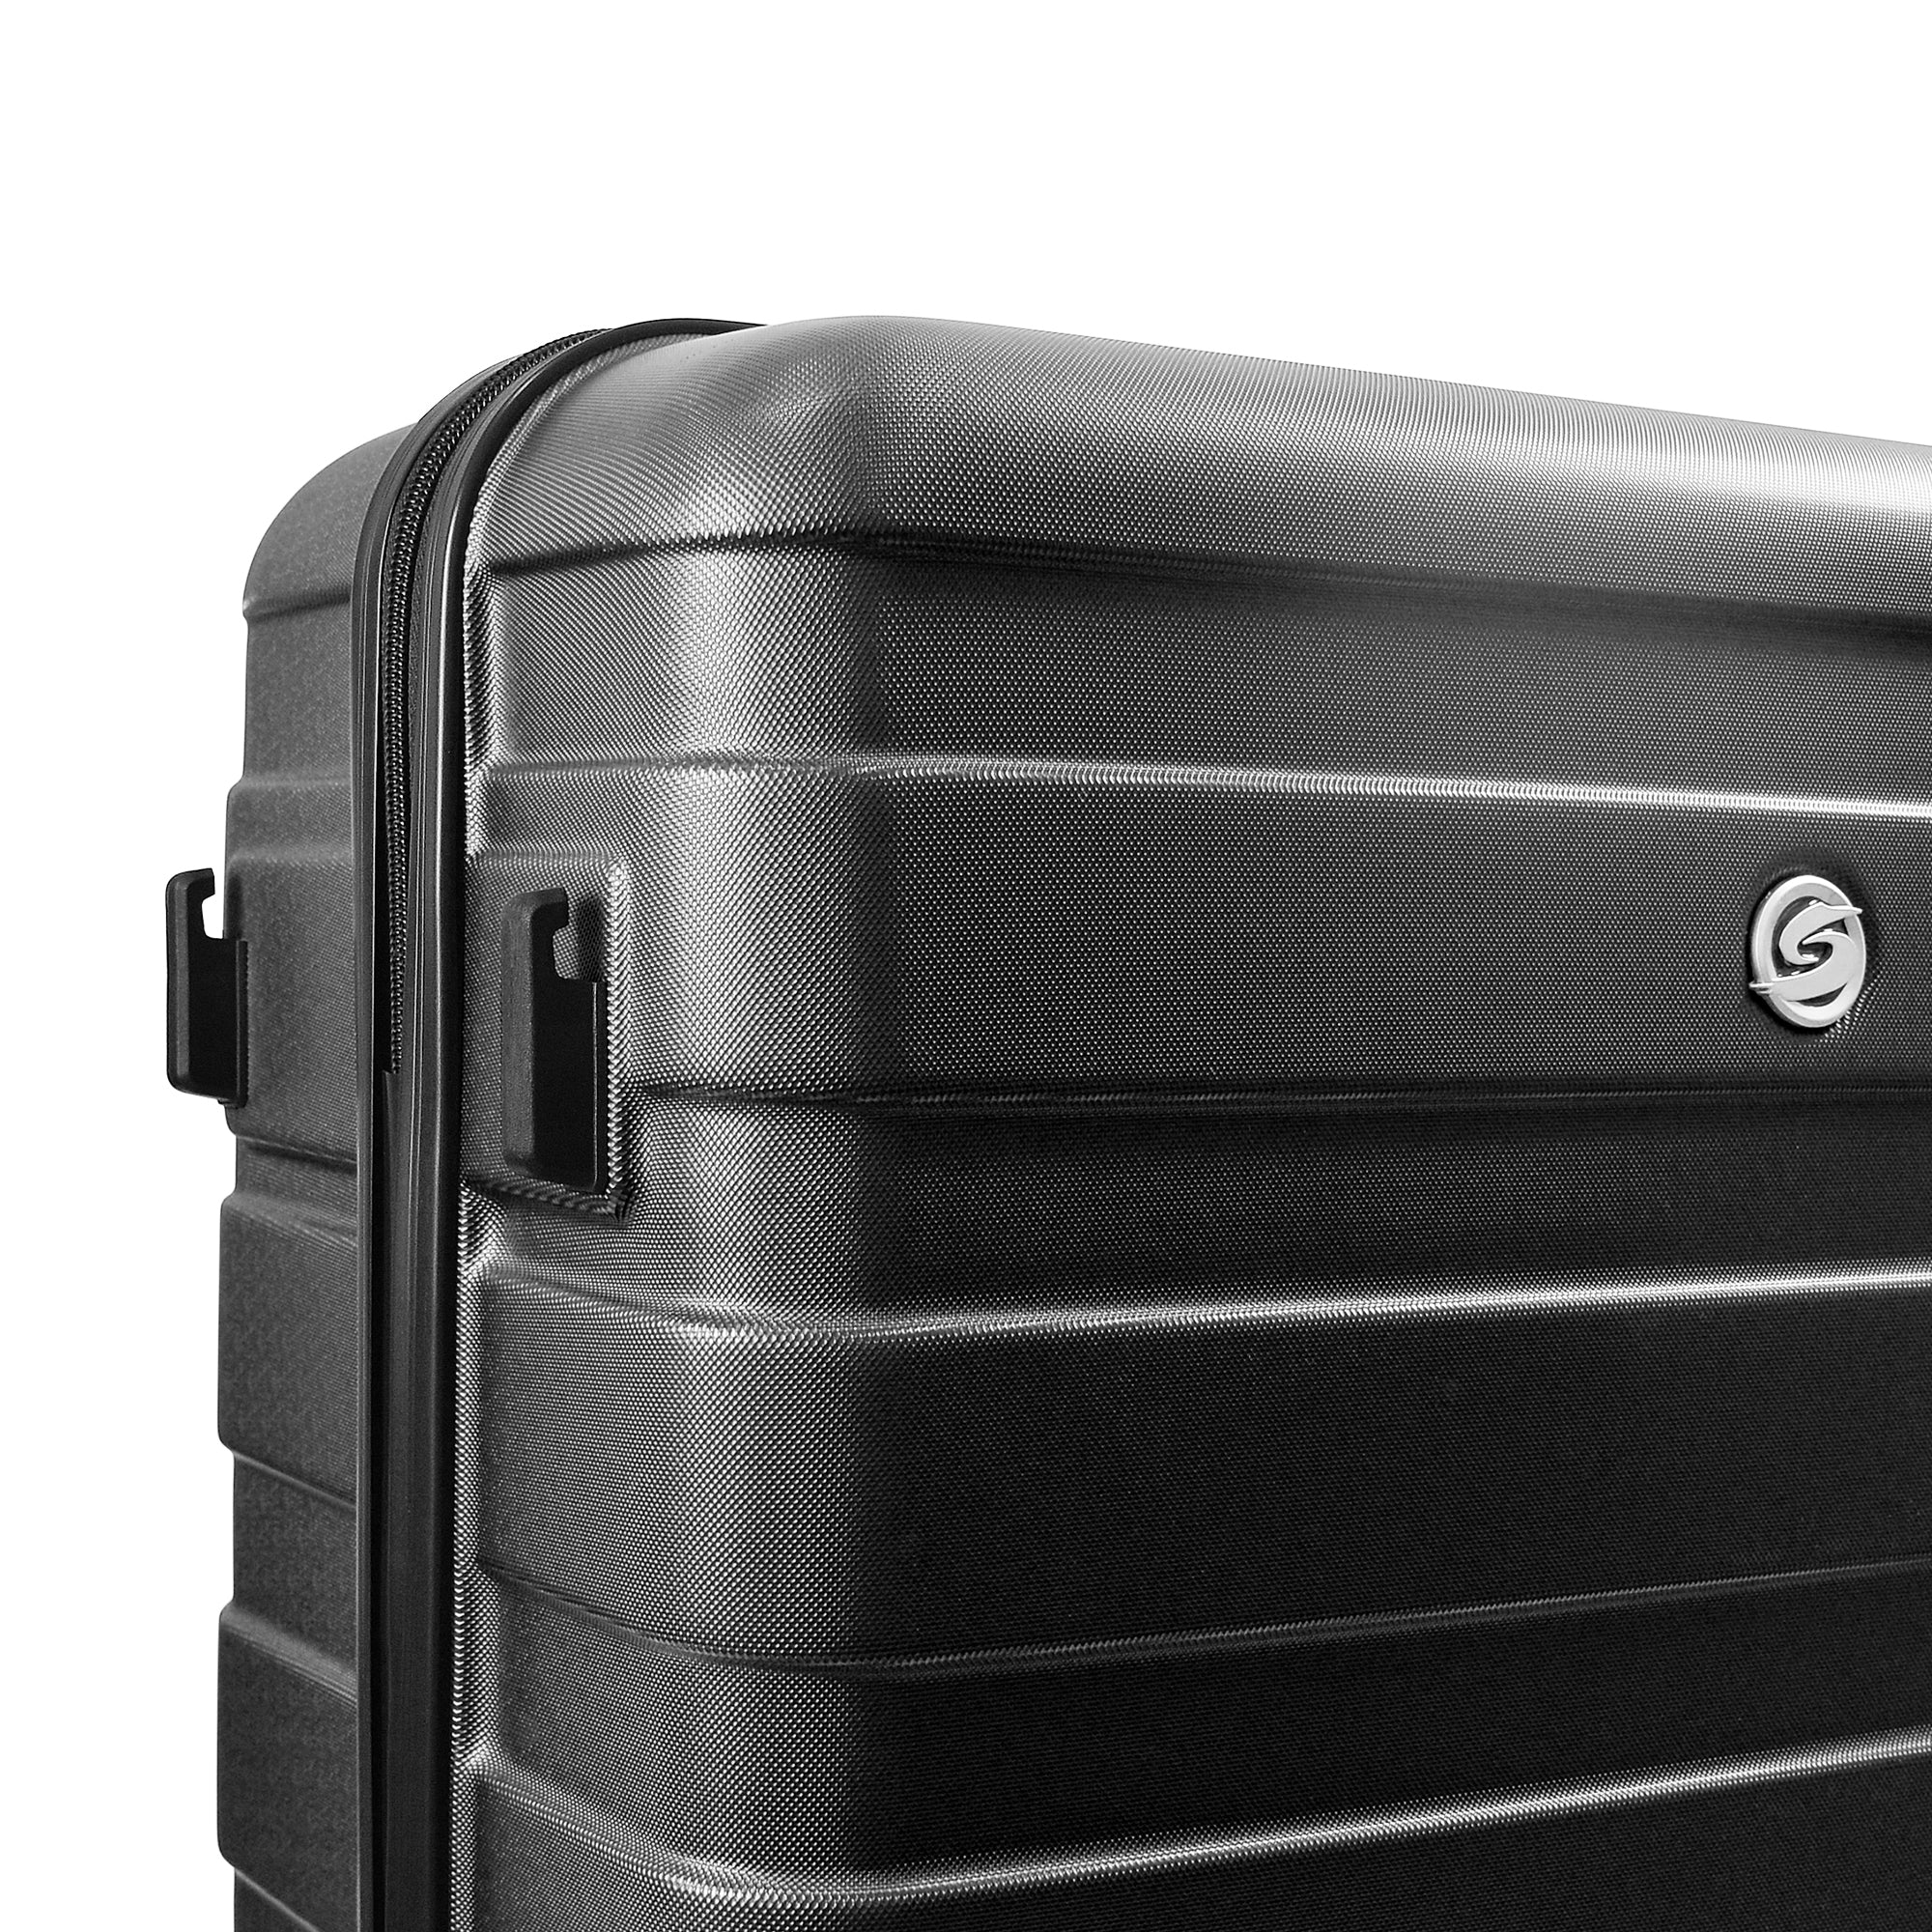 Luggage Sets 2 Piece, 20 inch 24 inch Carry on Luggage black-abs